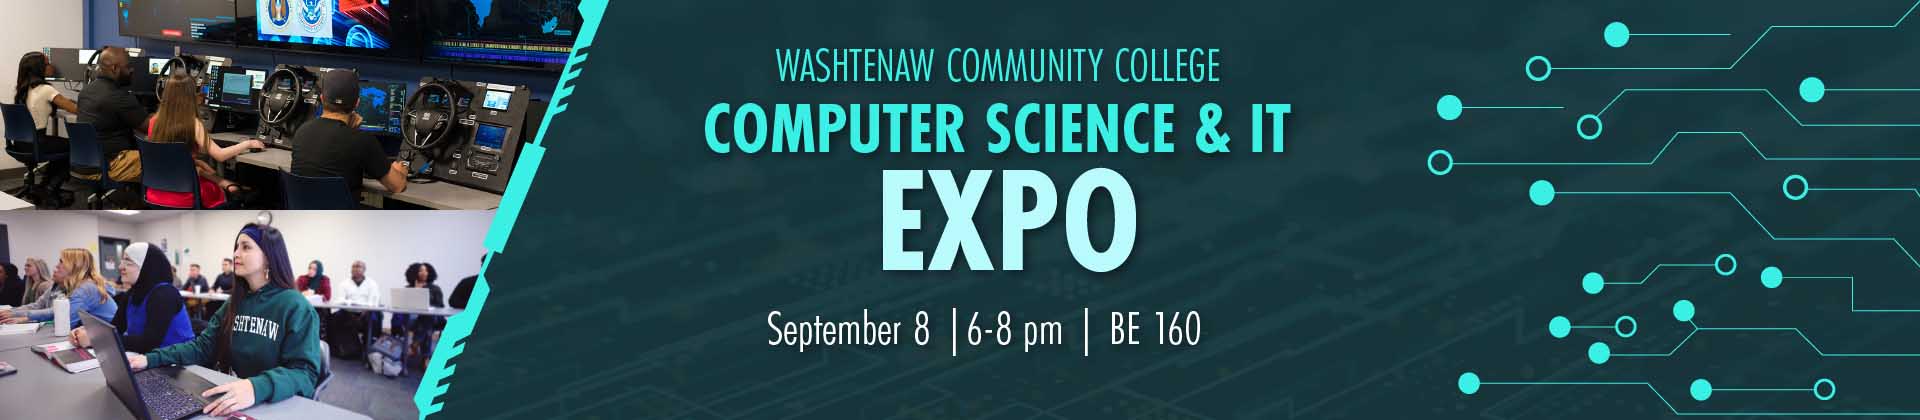 computer science and IT expo